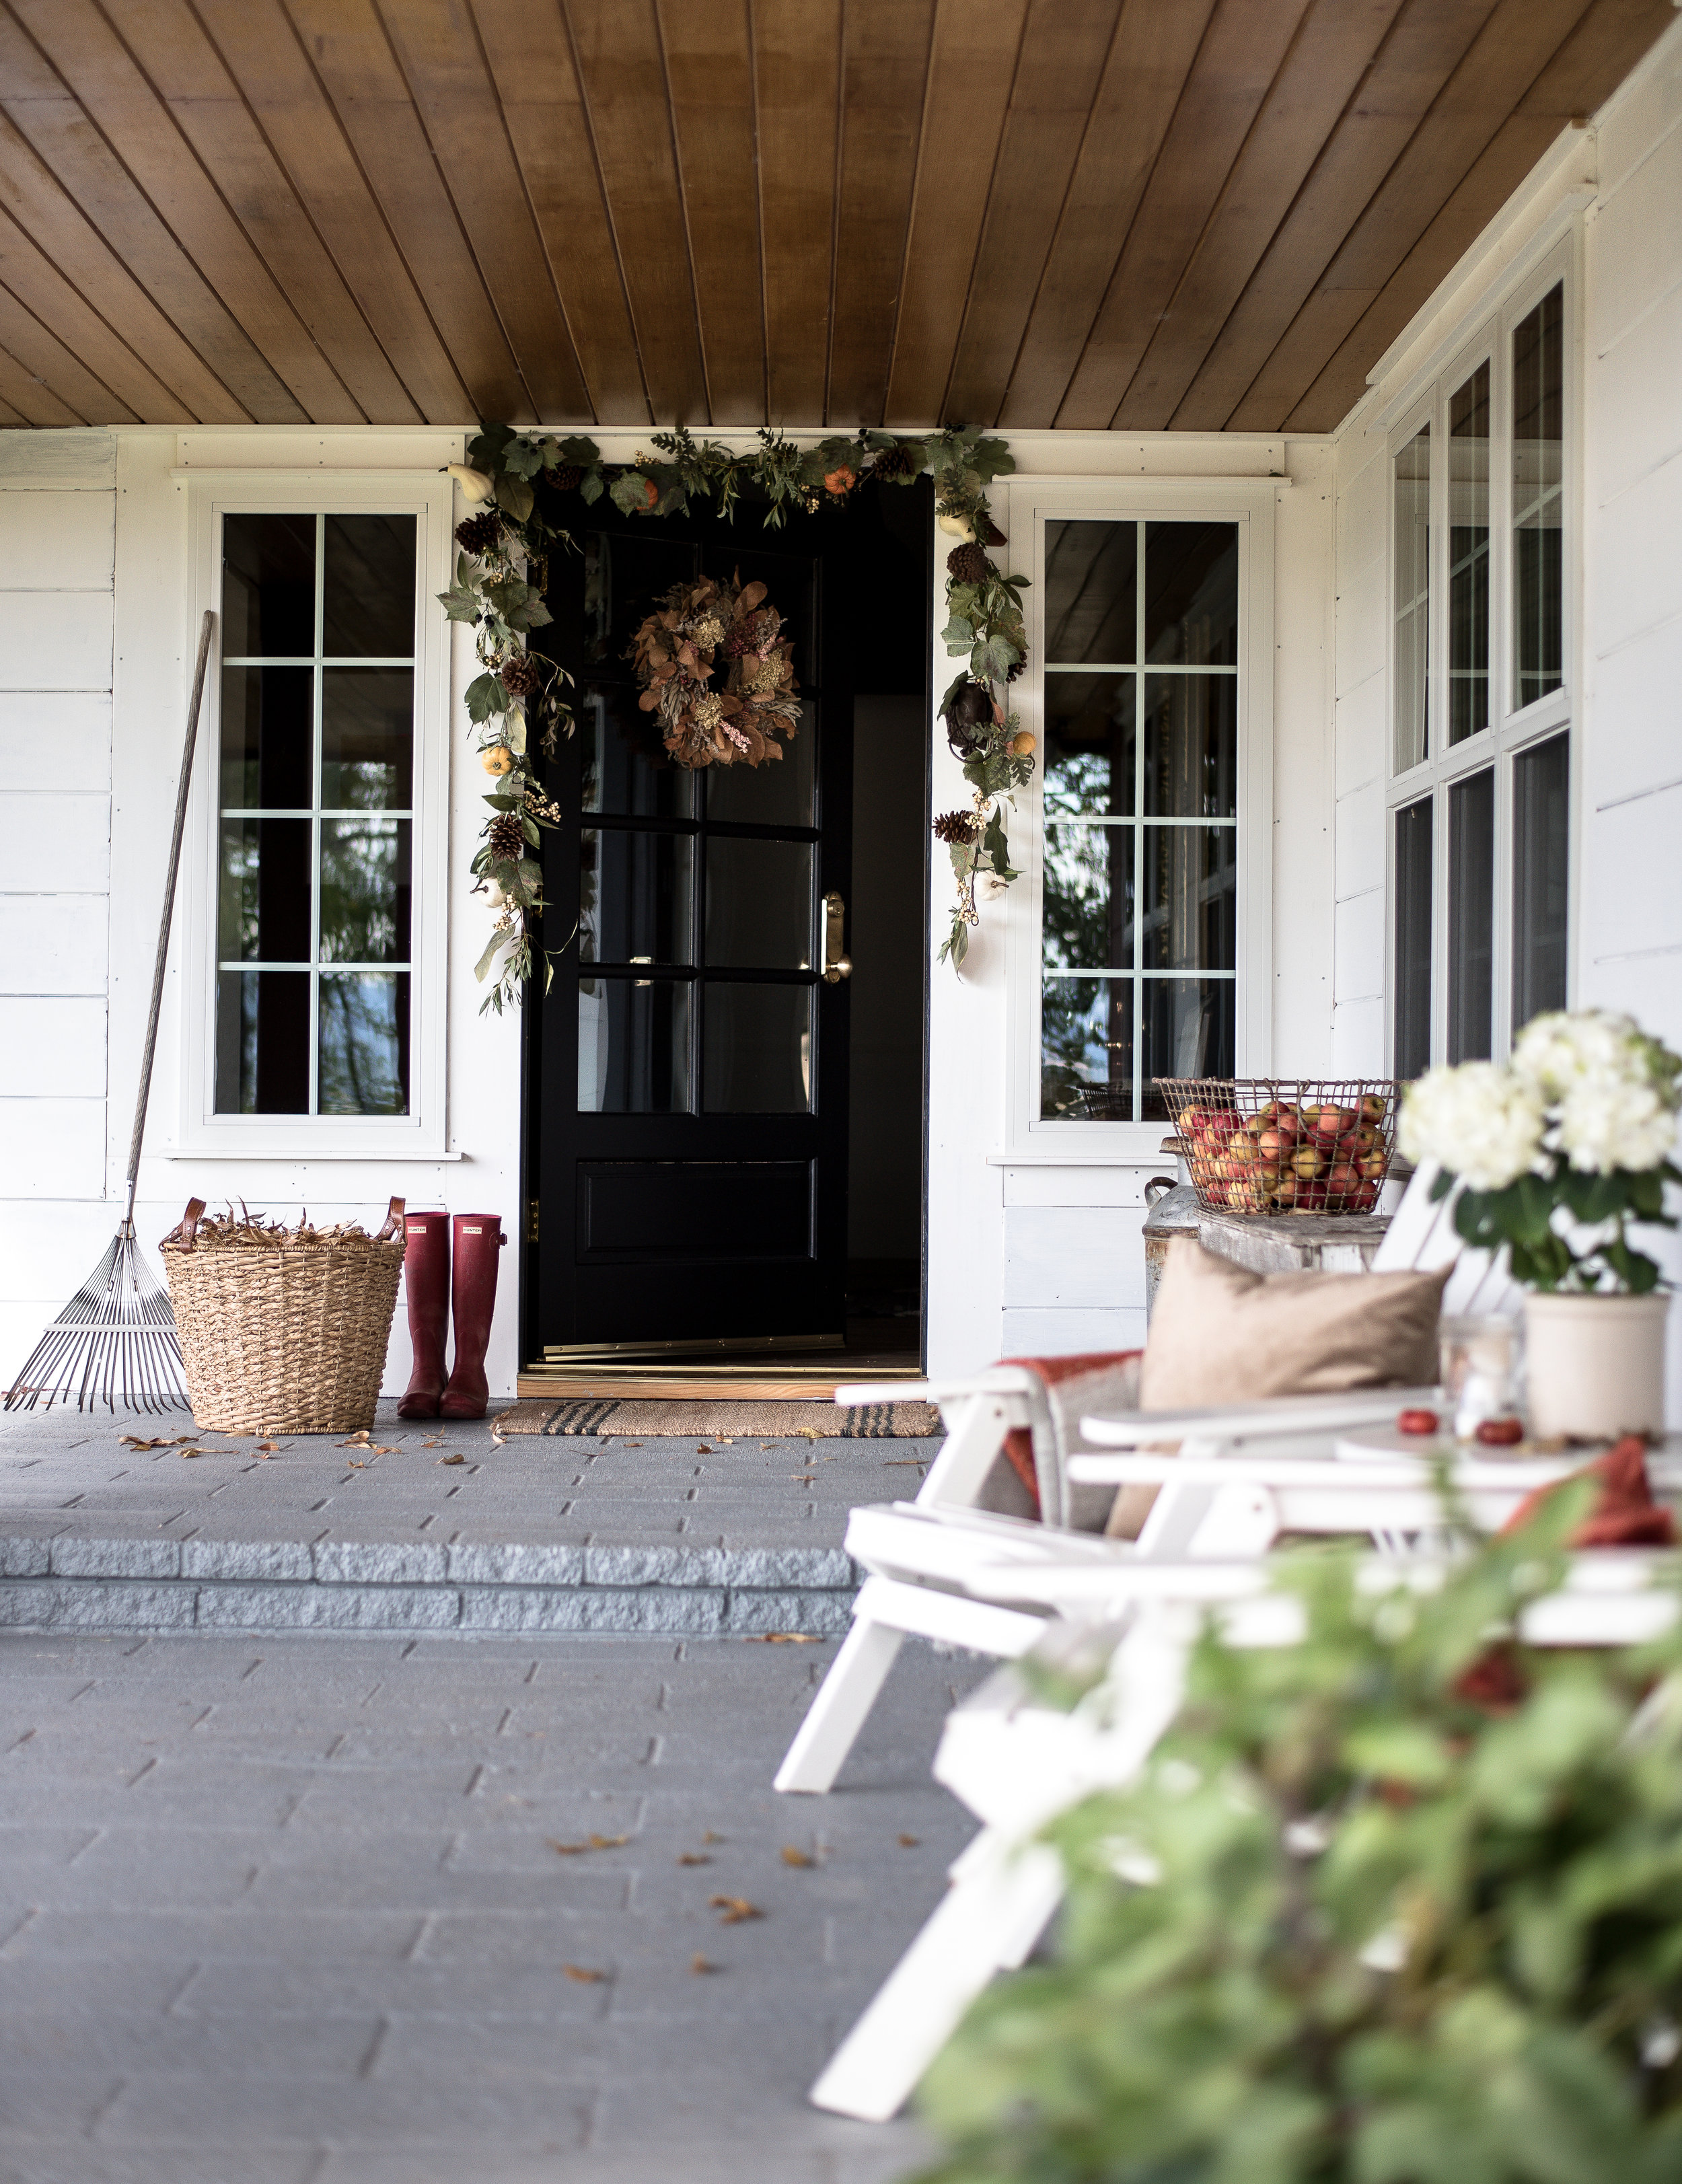 A few simple fall decorating ideas for your front porch from five different bloggers! #fallporch #falldecorating #falldecor #frontporchdecorations